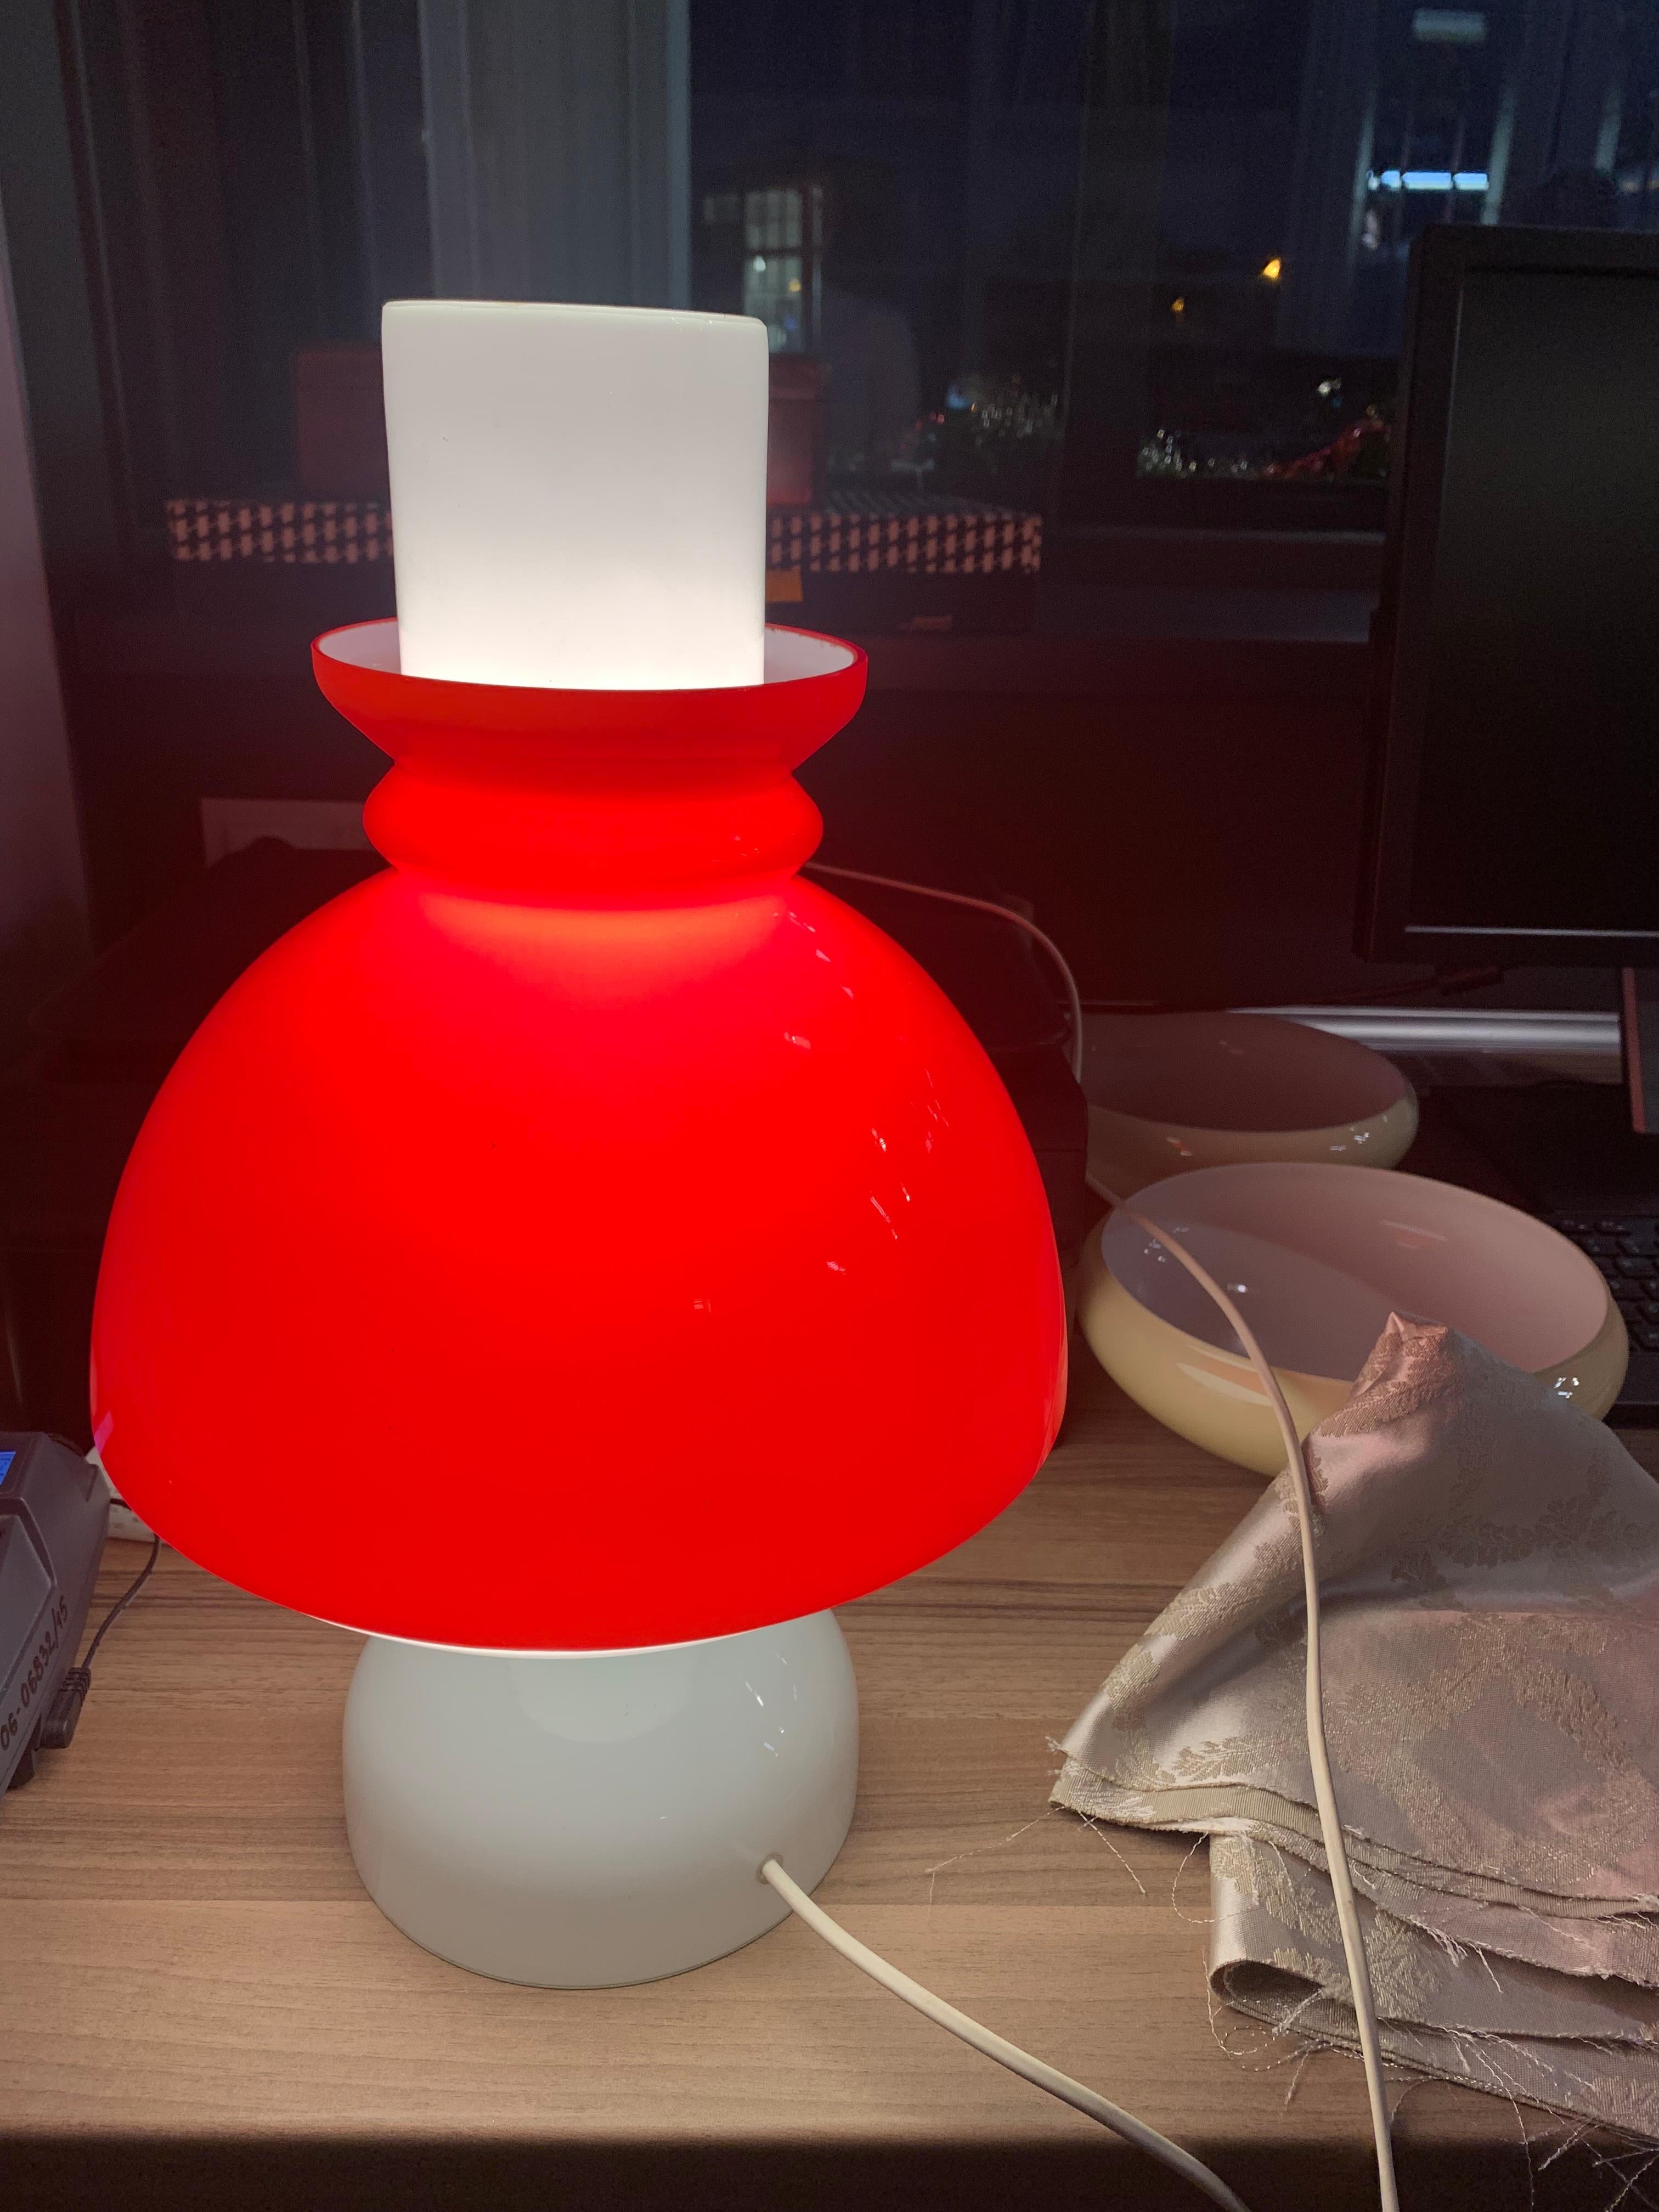 Glass table lamp produced in the Czech Republic in the 1960s.
Very good condition.
Measures: Height: 42cm. Diameter at its widest point: 25cm.